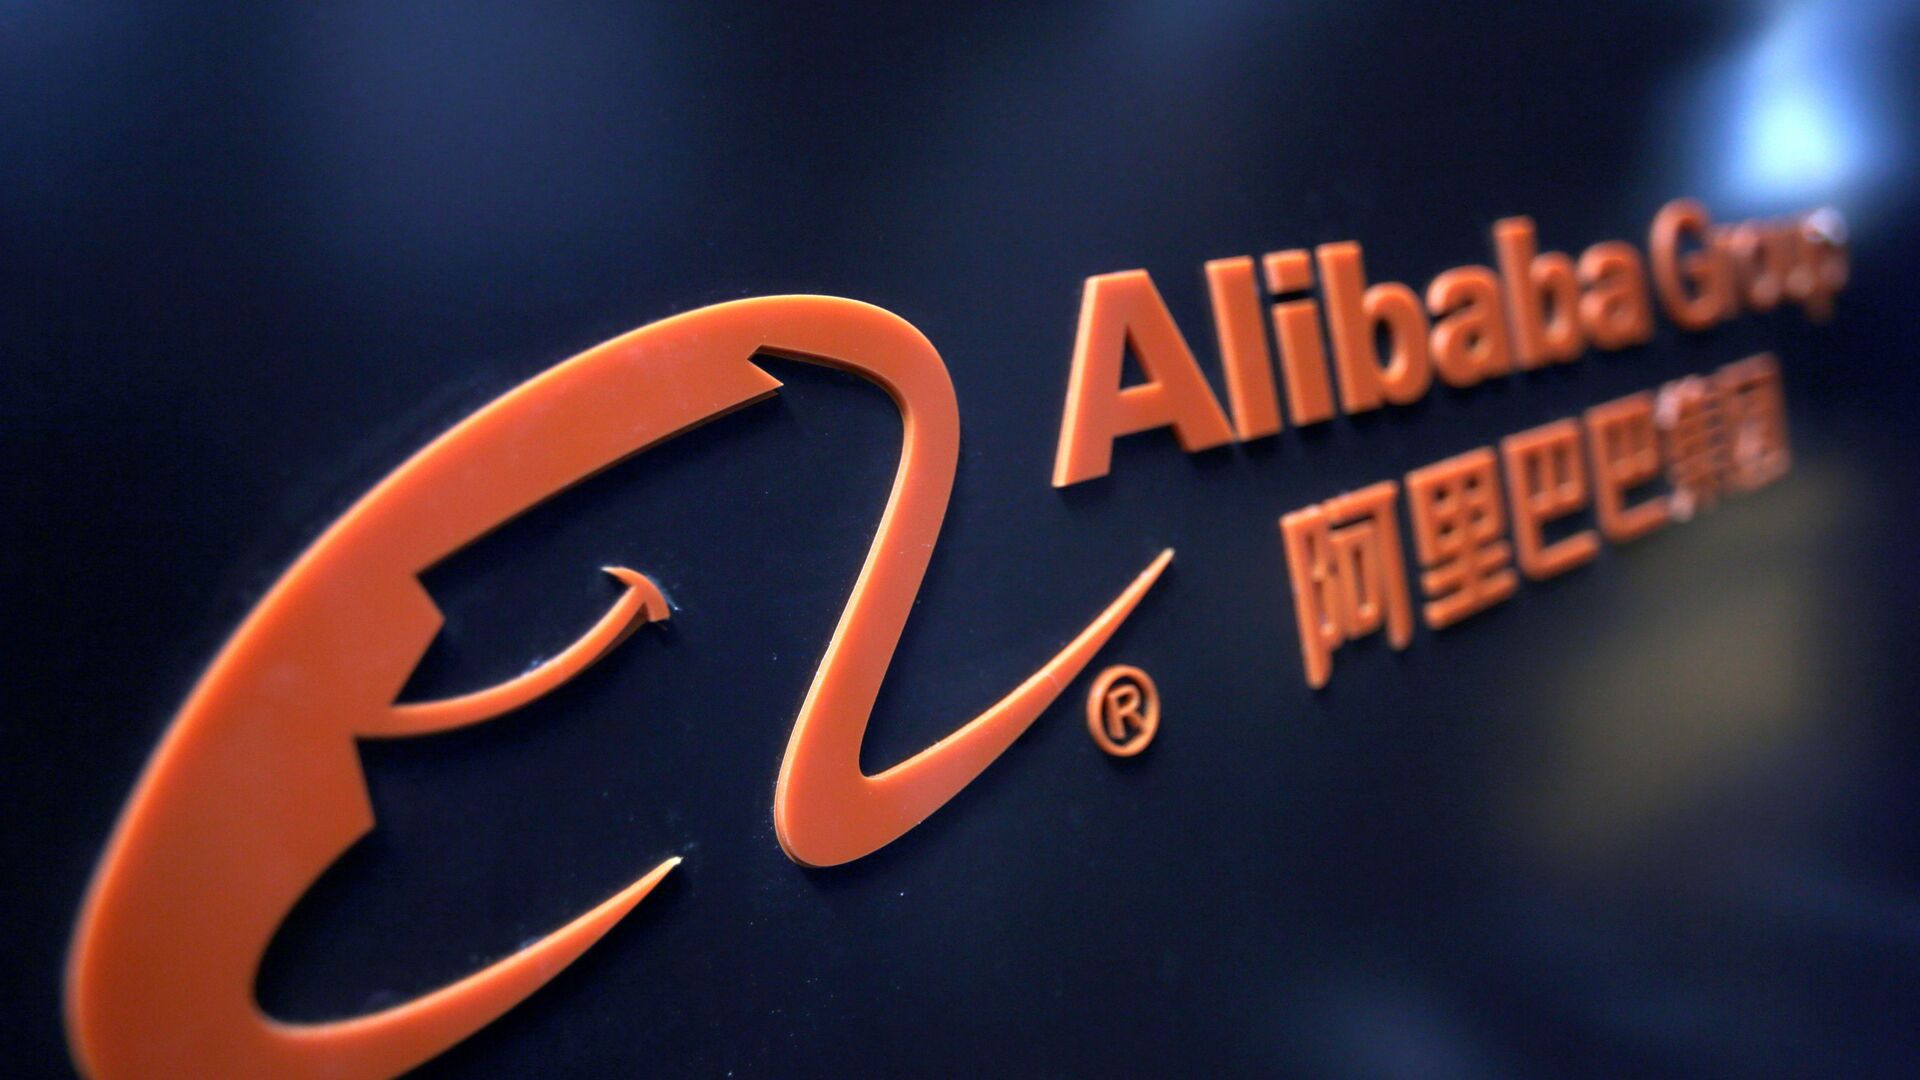  A logo of Alibaba Group is seen at an exhibition during the World Intelligence Congress in Tianjin, China May 16, 2019 - Sputnik International, 1920, 14.02.2022